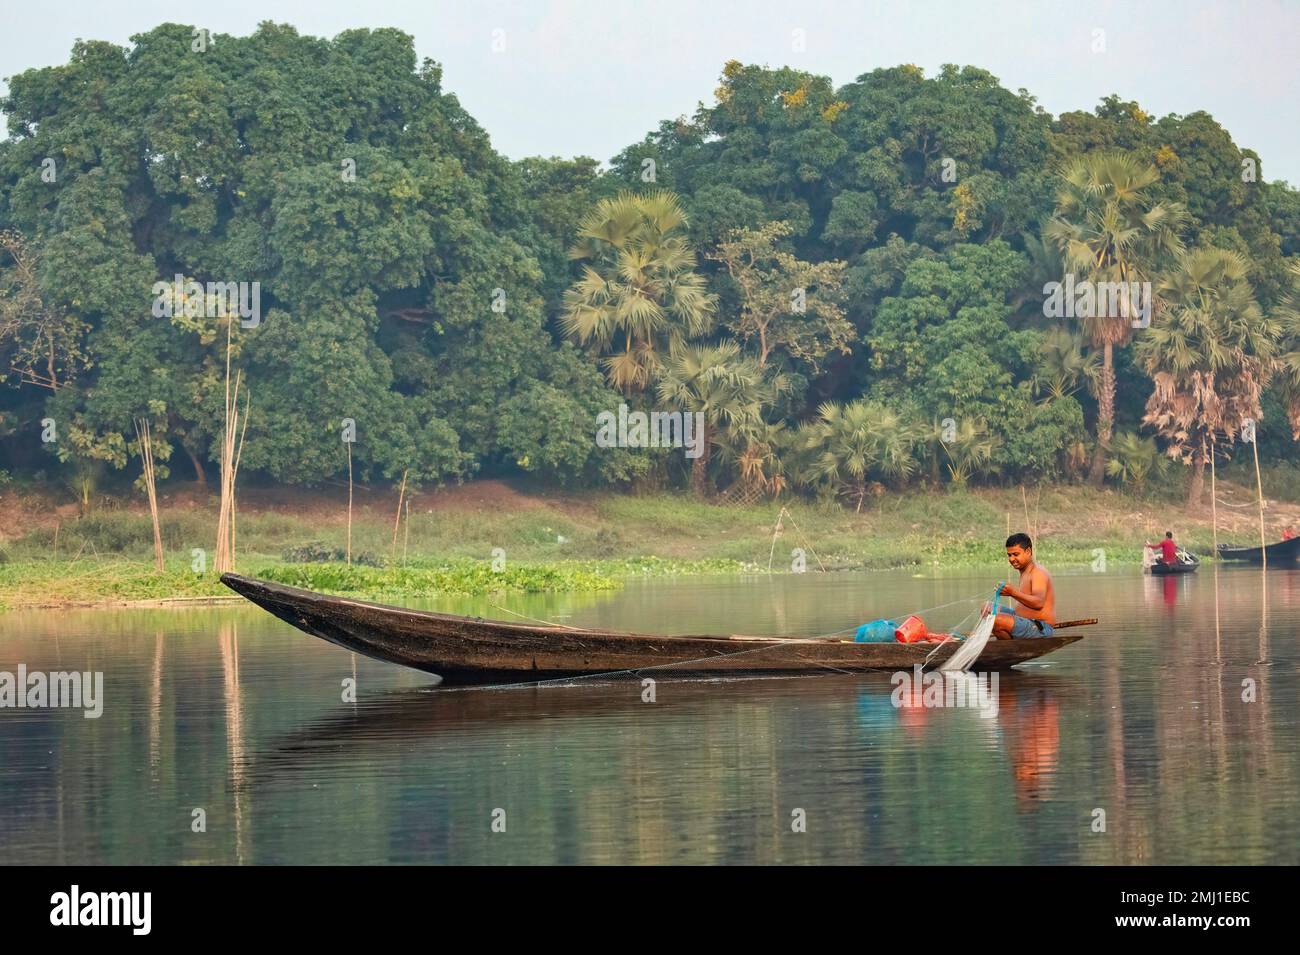 Man sitting on his boat fishing on river Ganges at in the estuary region of Purbasthali, Burdwan district, West Bengal, India Stock Photo